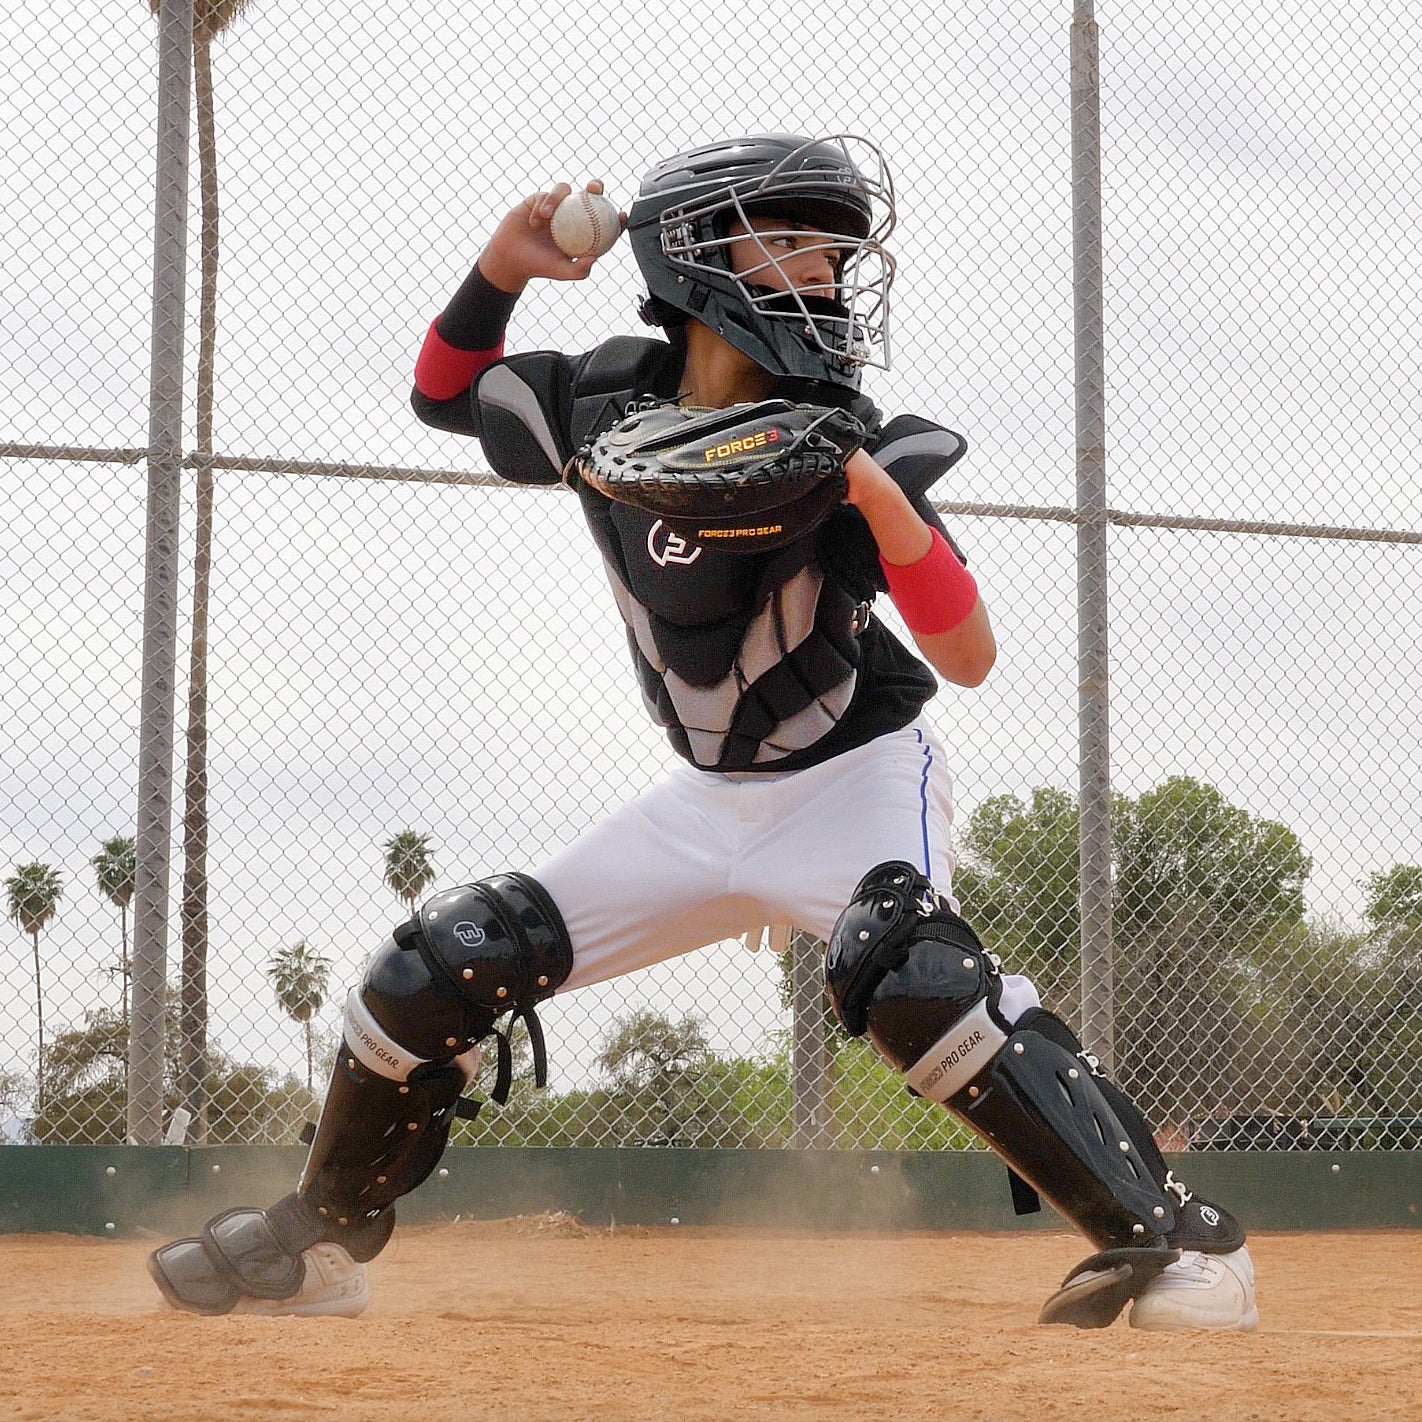 Catcher Shin Guards with Dupont™ Kevlar®